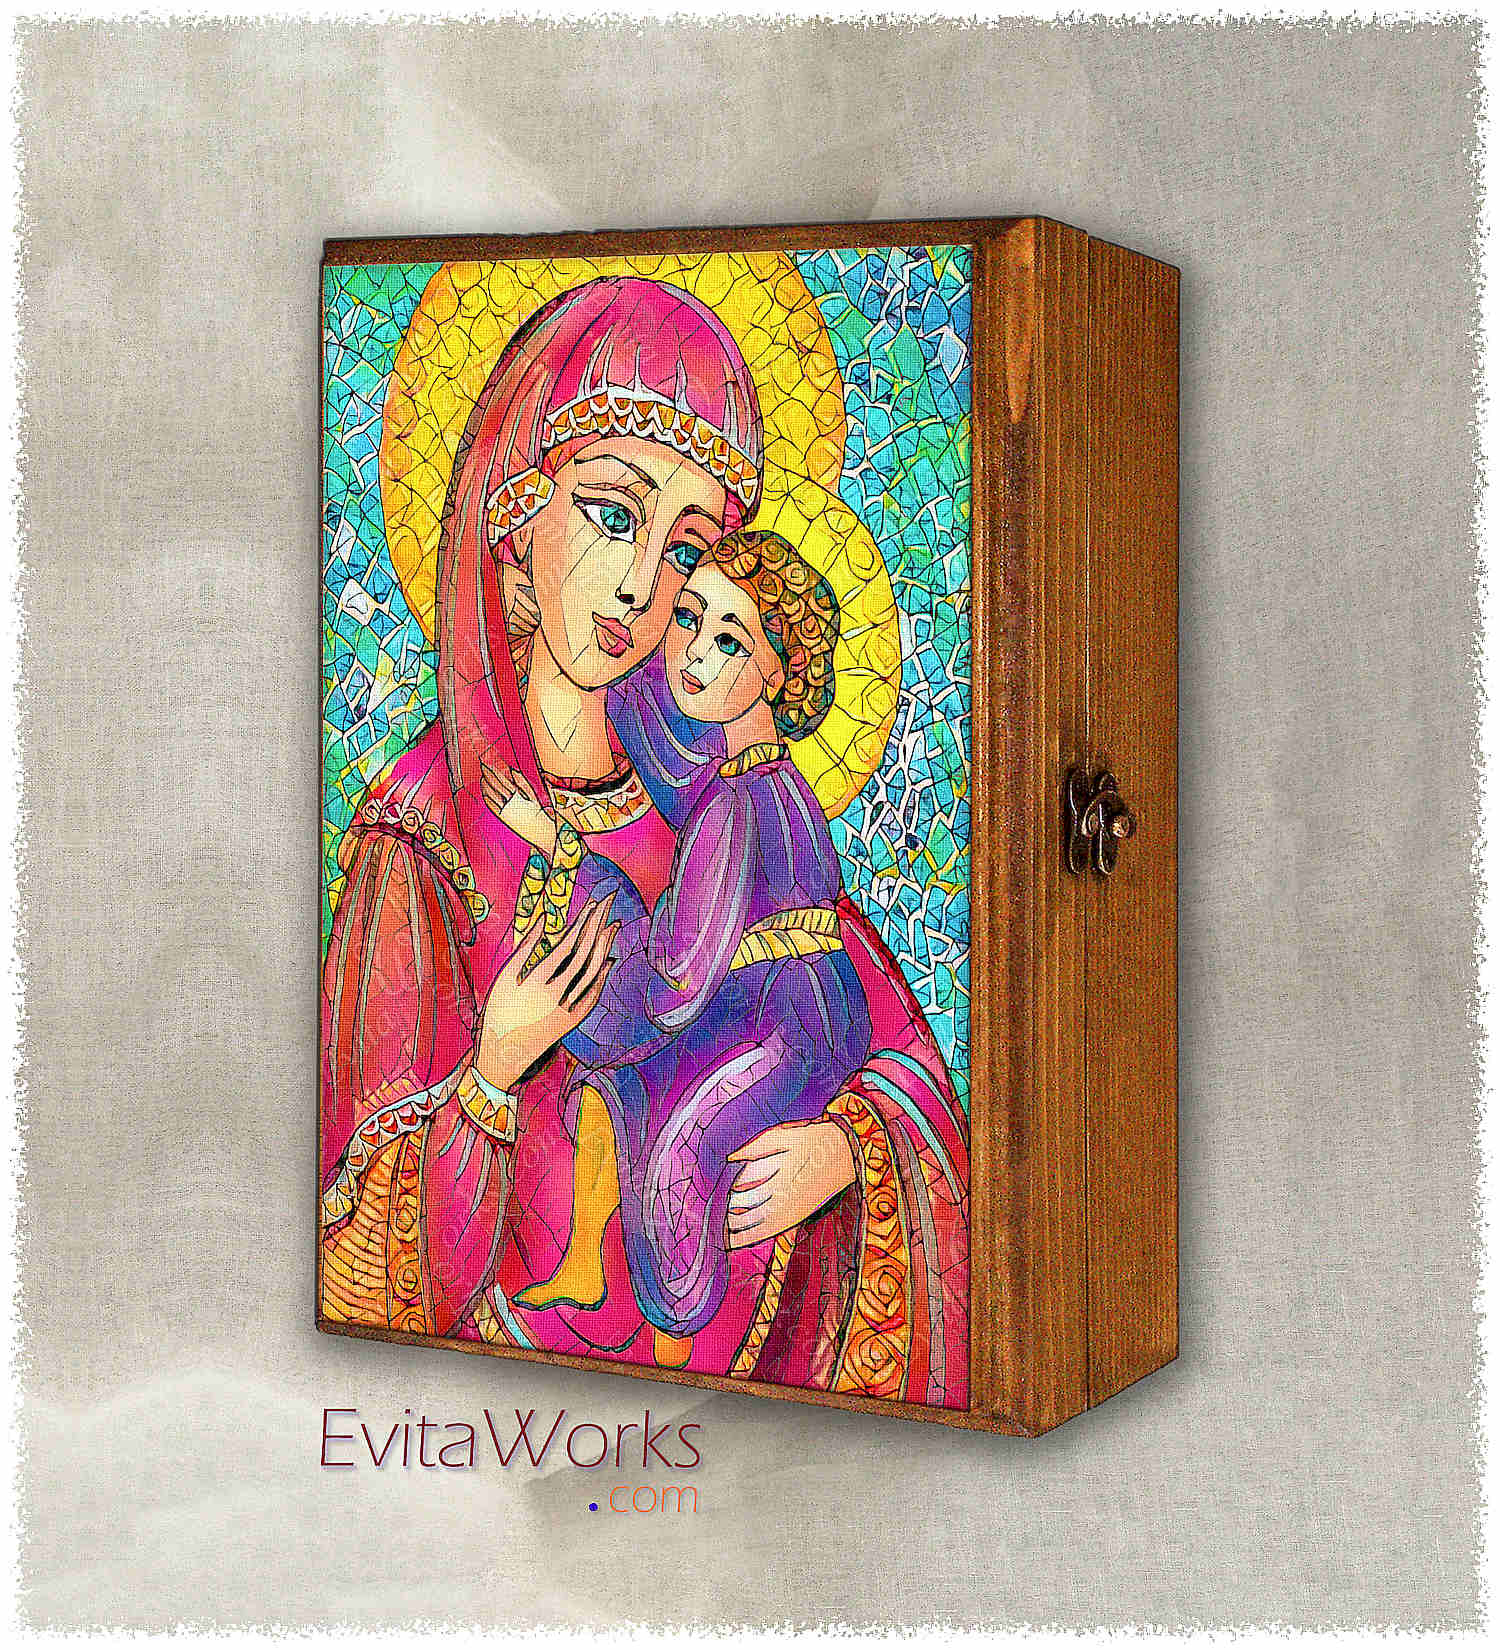 Hit to learn about "Green Ray Madonna, Mother and Child" on jewelboxes